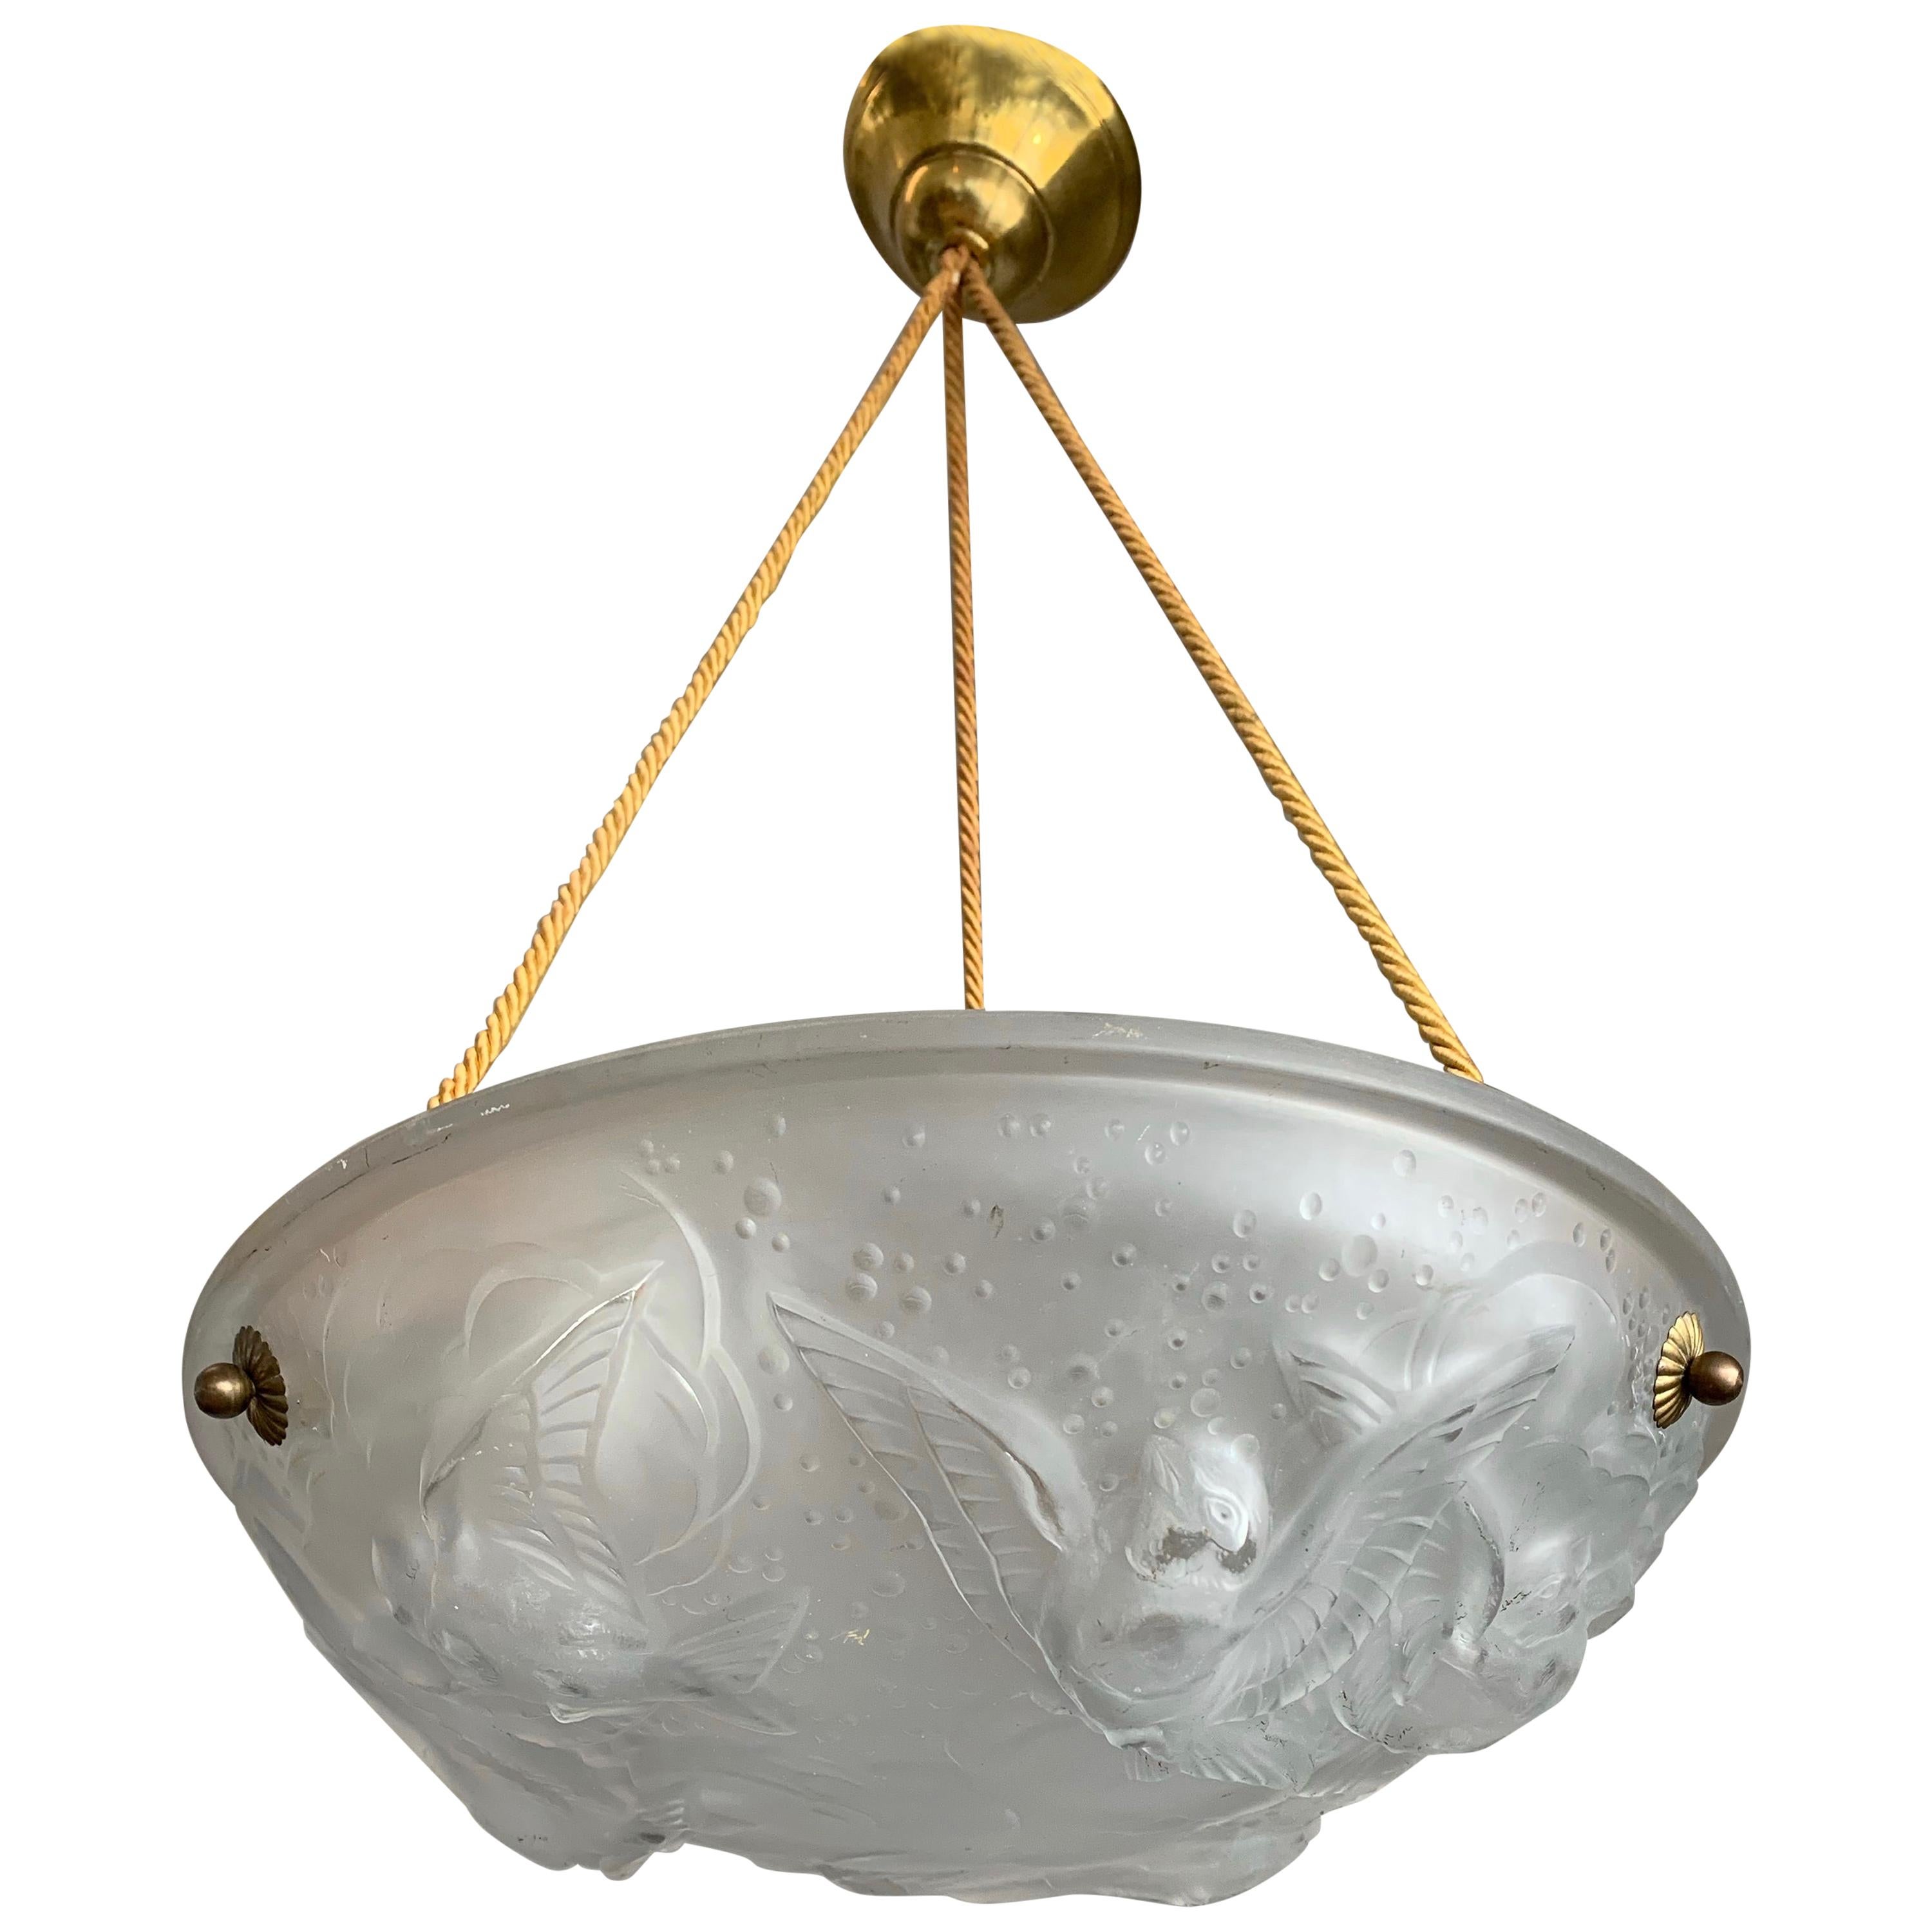 Stylish Art Deco Chandelier, Frosted Glass with Flying House Sparrows by Muller